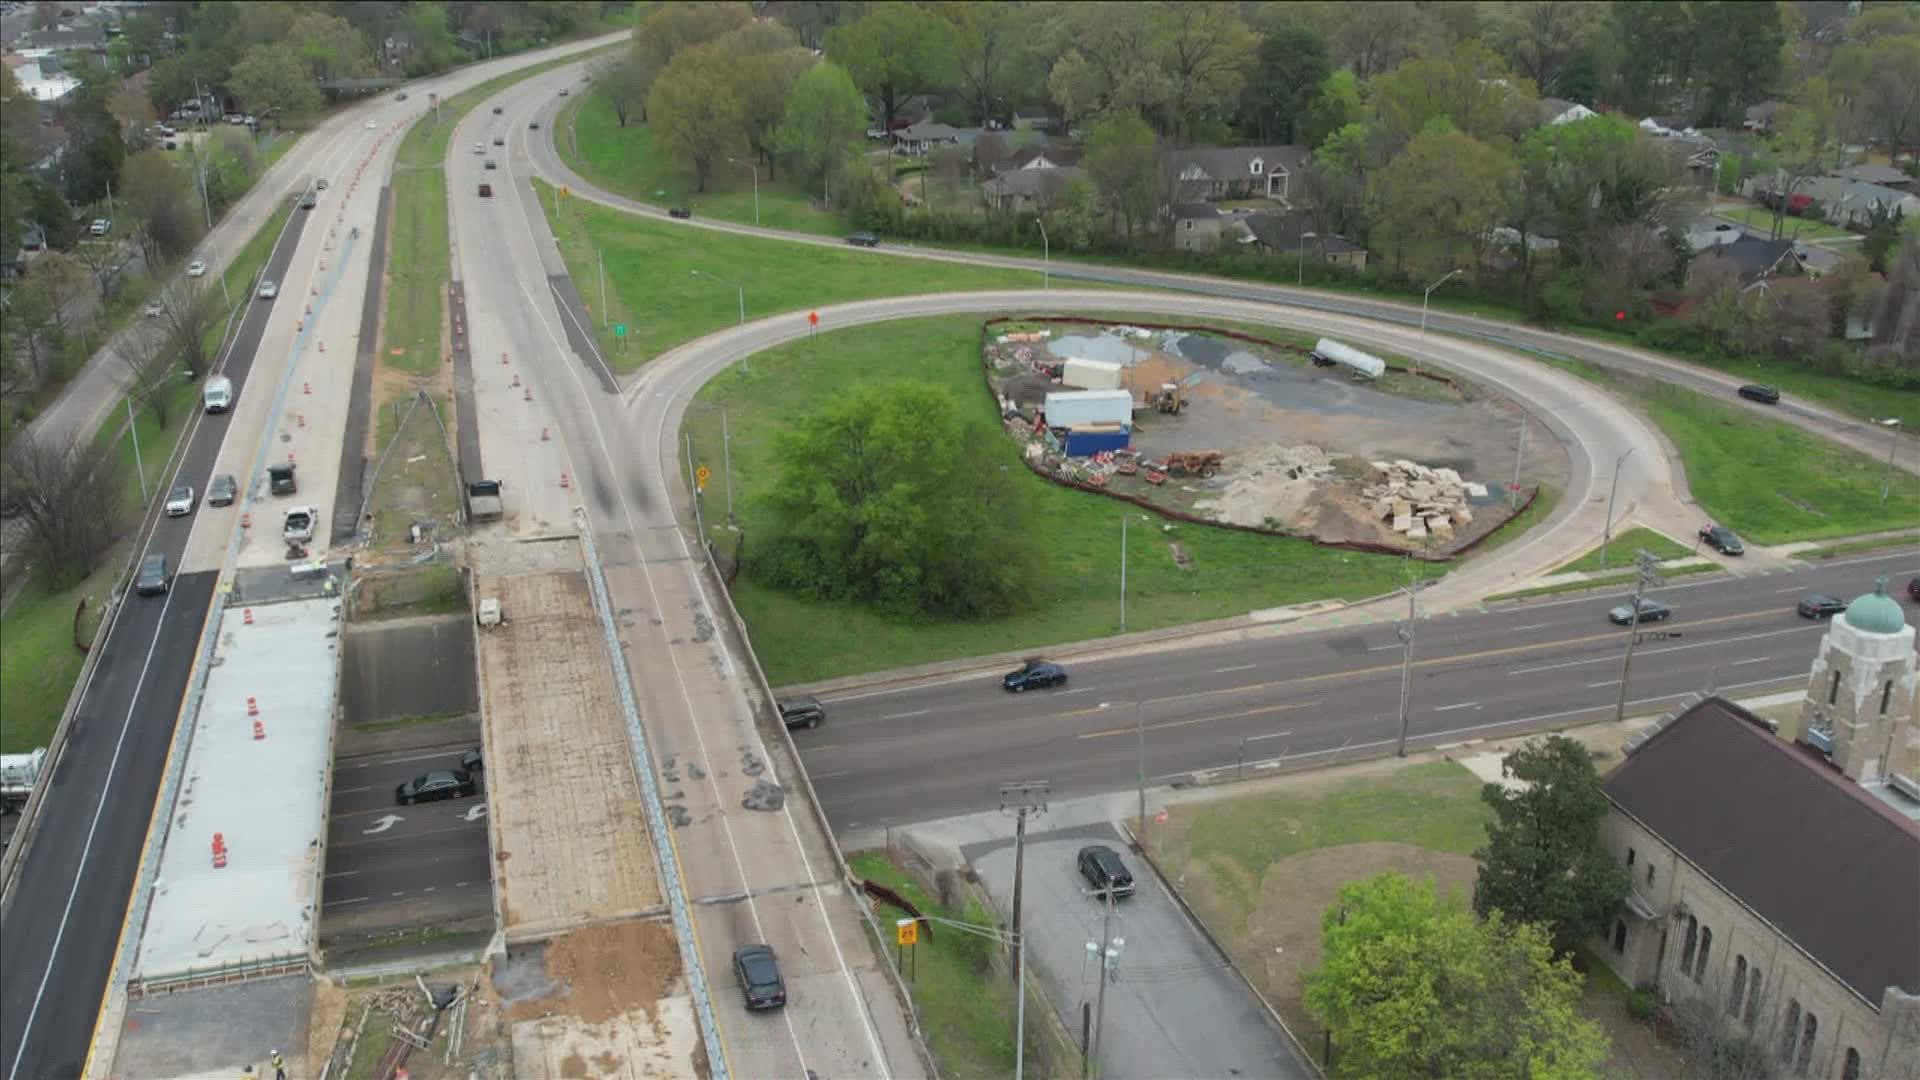 We reached out to Memphis drivers who say they are fed up with construction delays on the popular city thoroughfare.